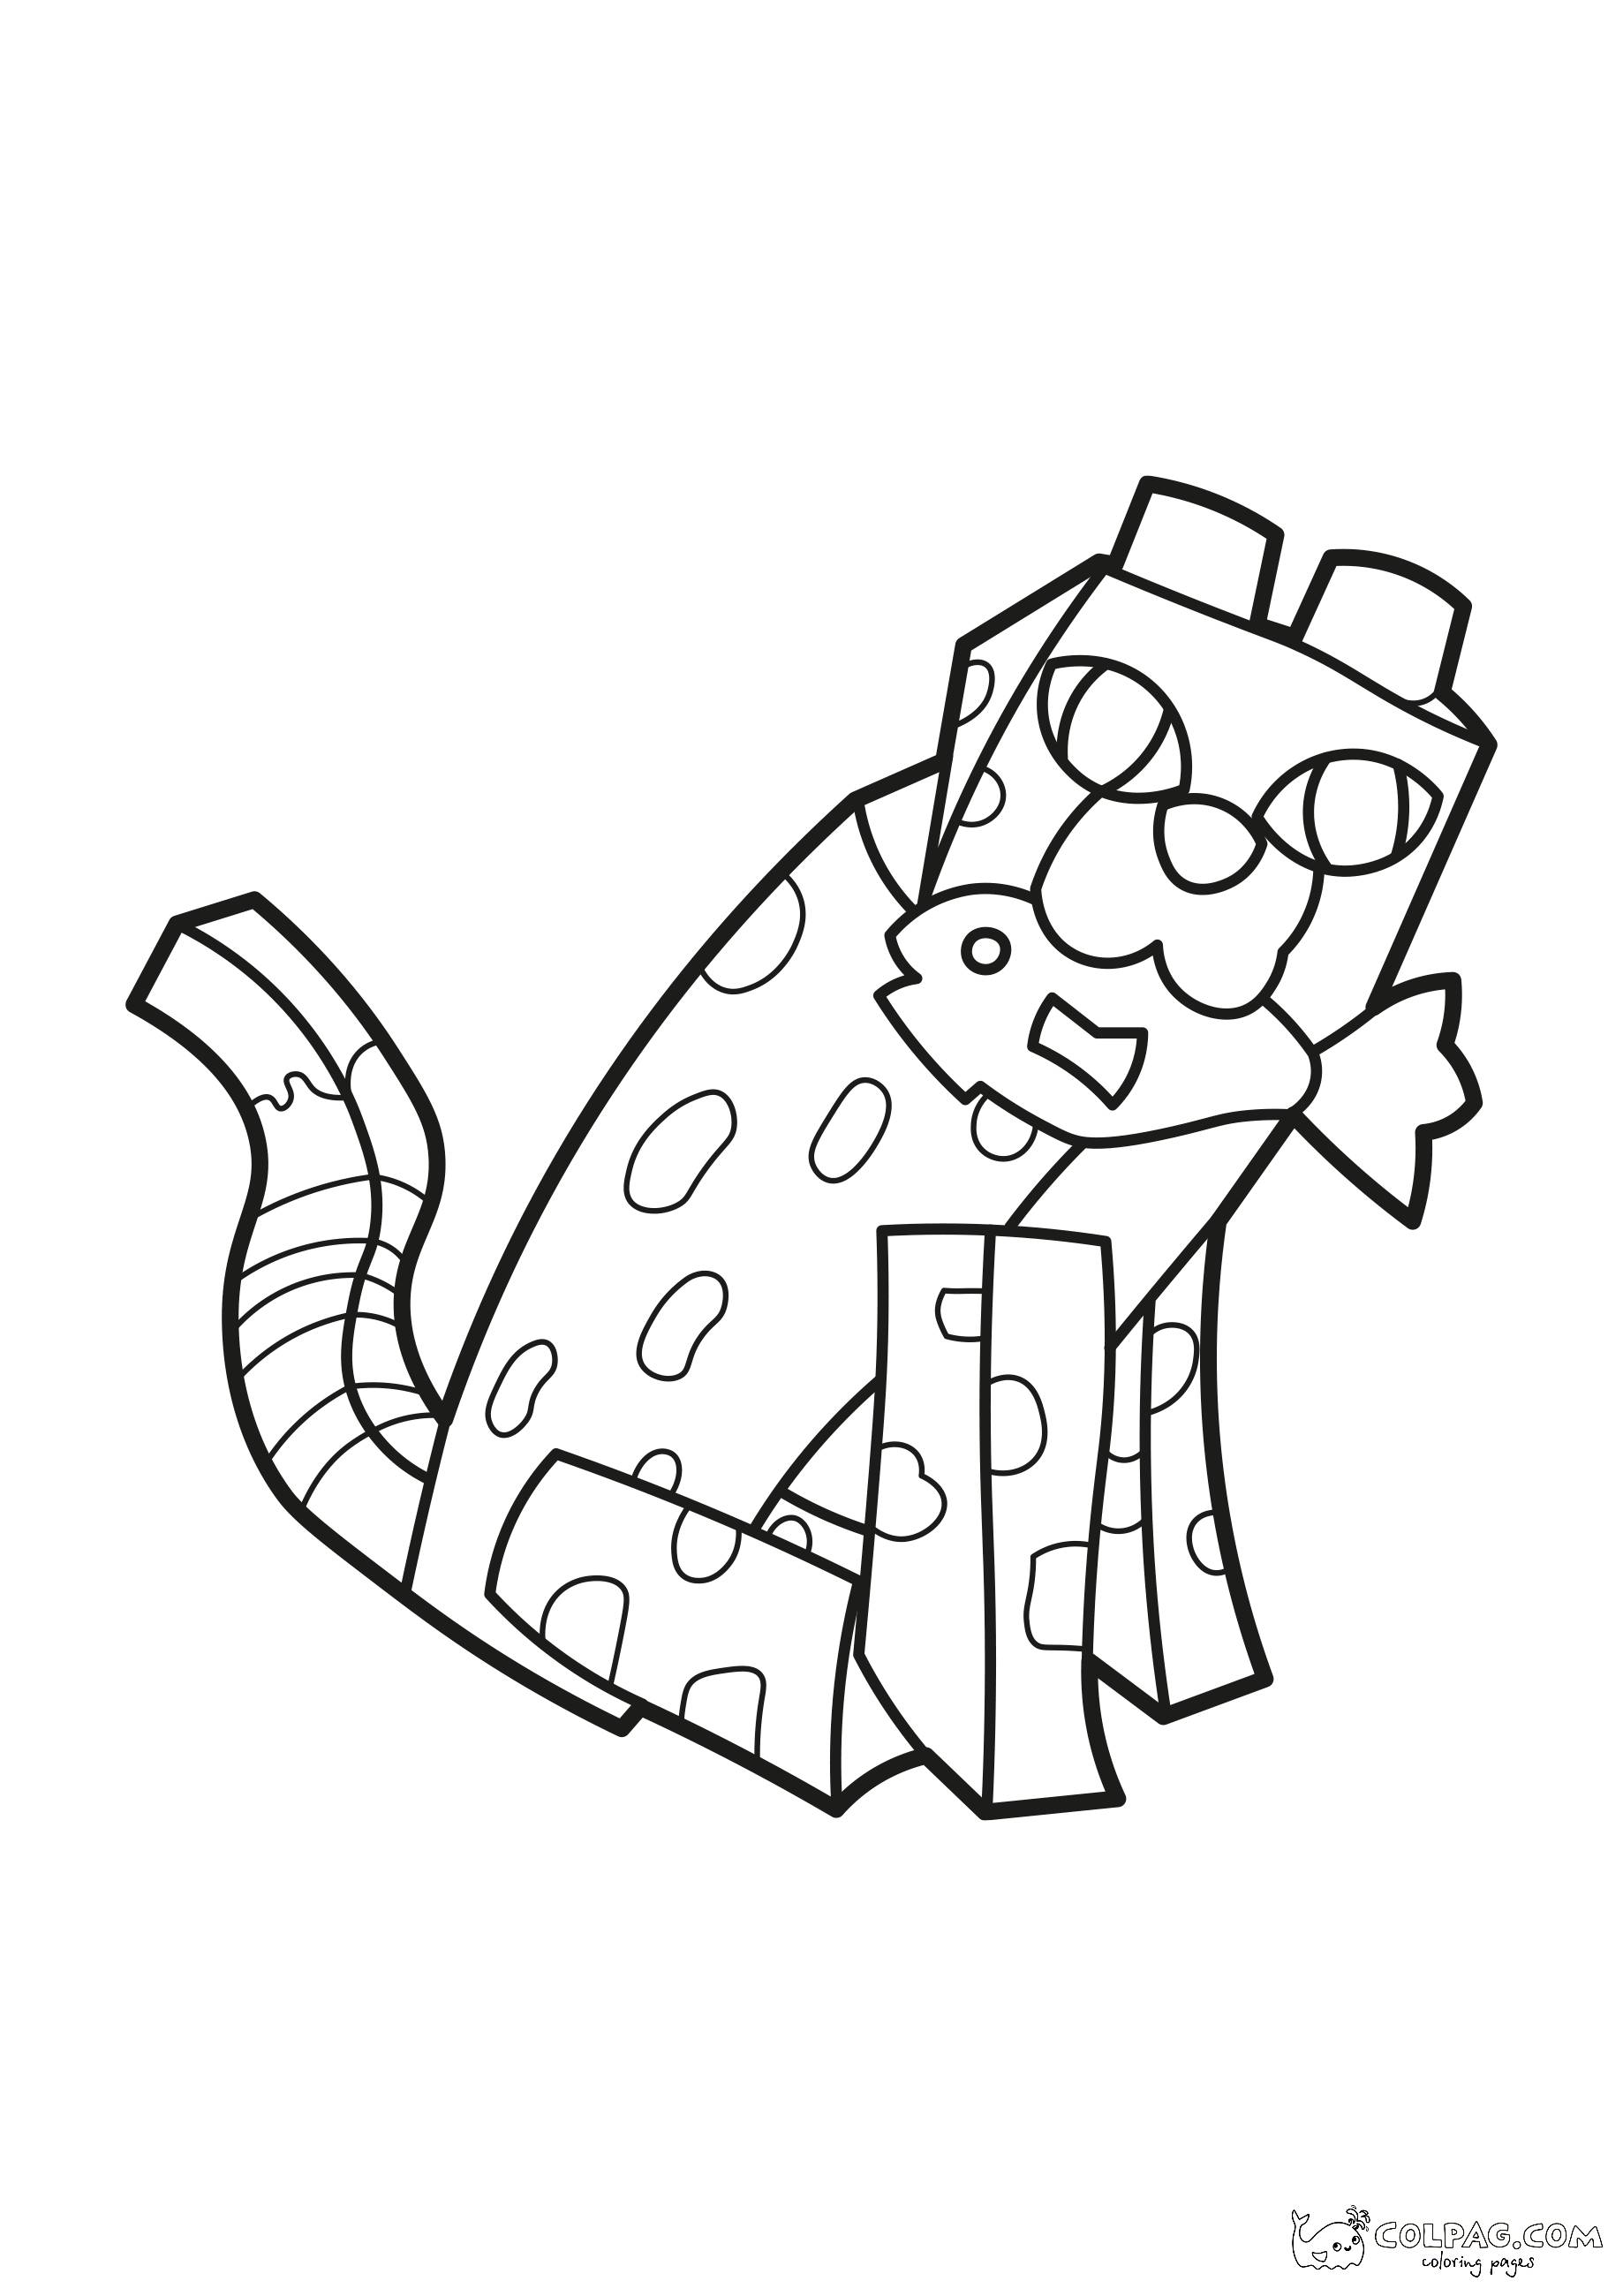 ocelot-1-minecraft-coloring-page-colpag